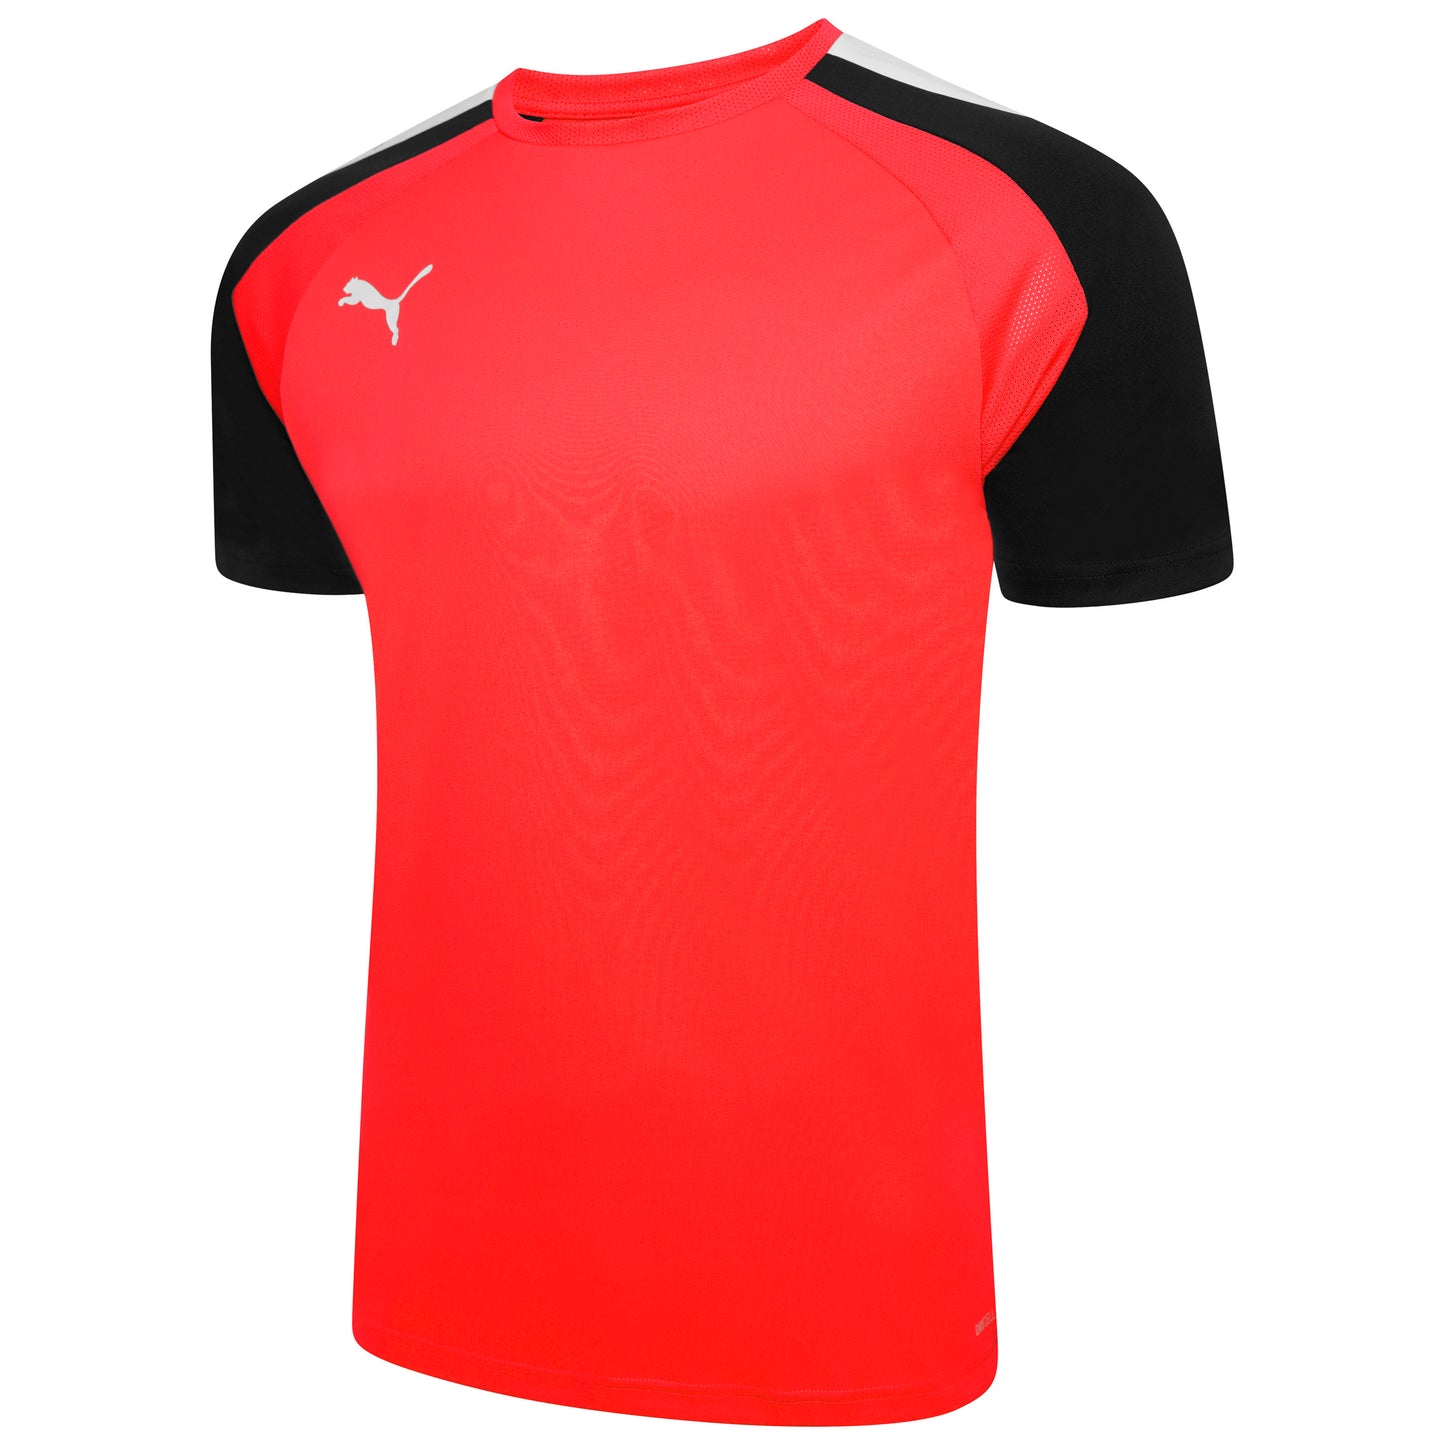 Wigan Athletic Ladies - Youth Training Top